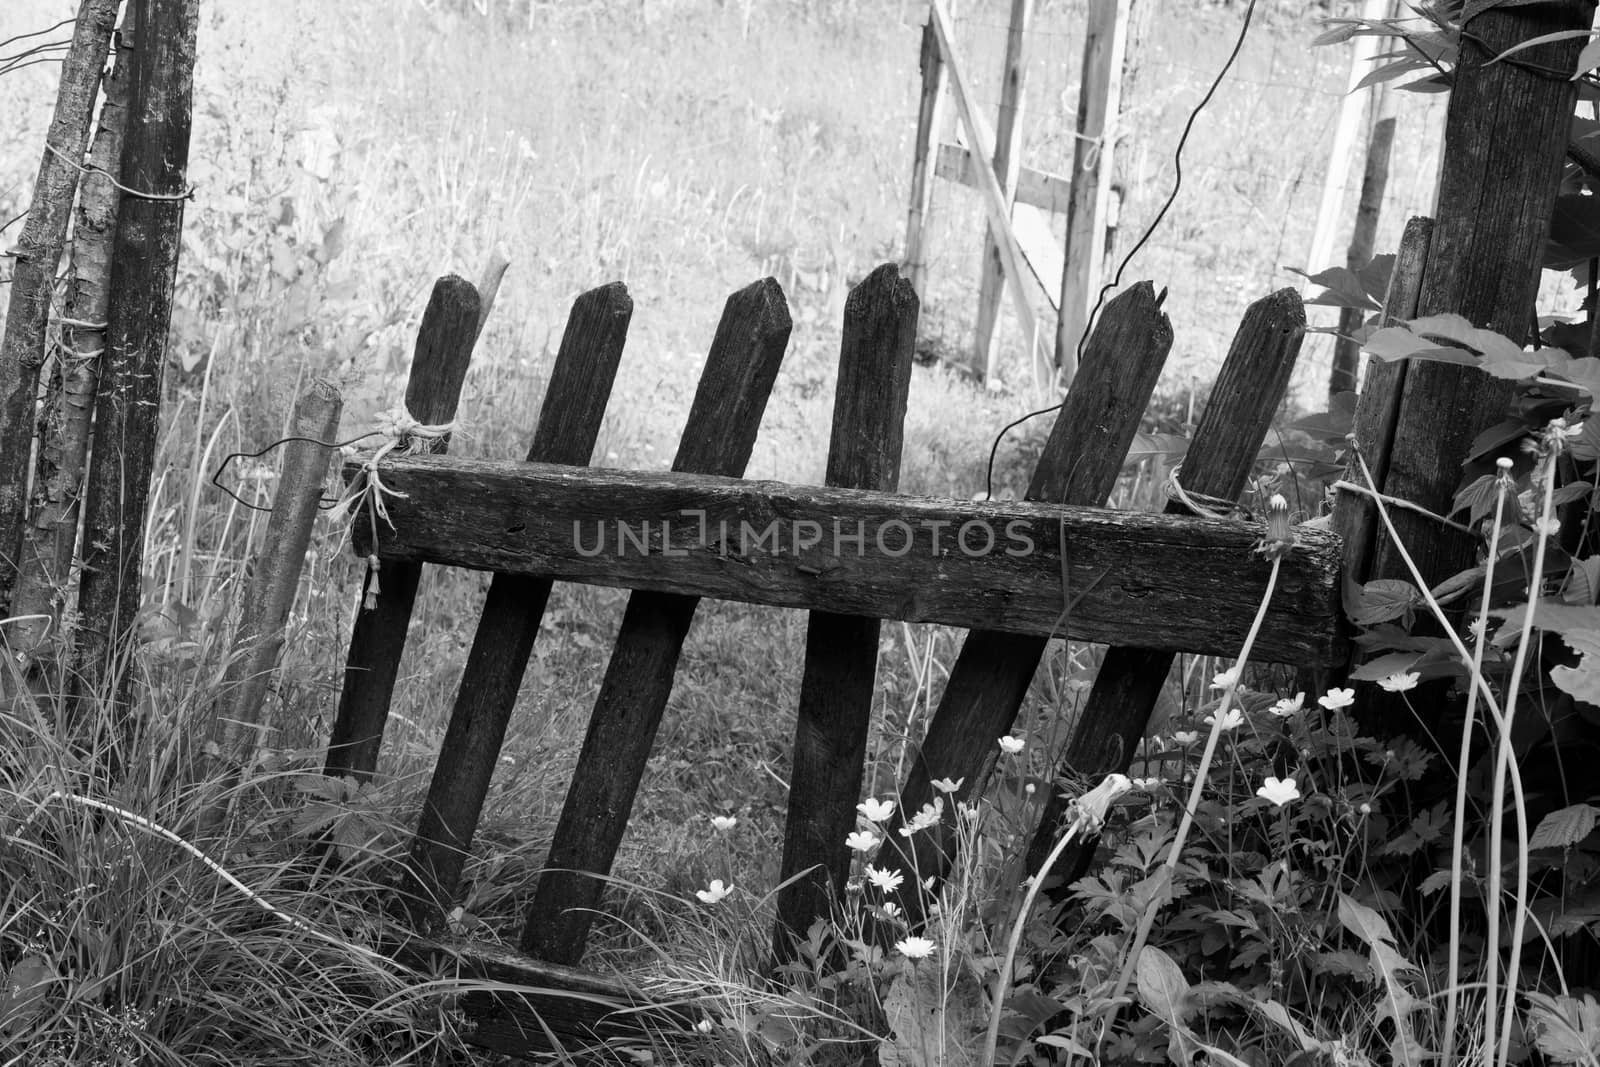 Old wooden fence, monochrome, broken and overgrown in a deserted garden.